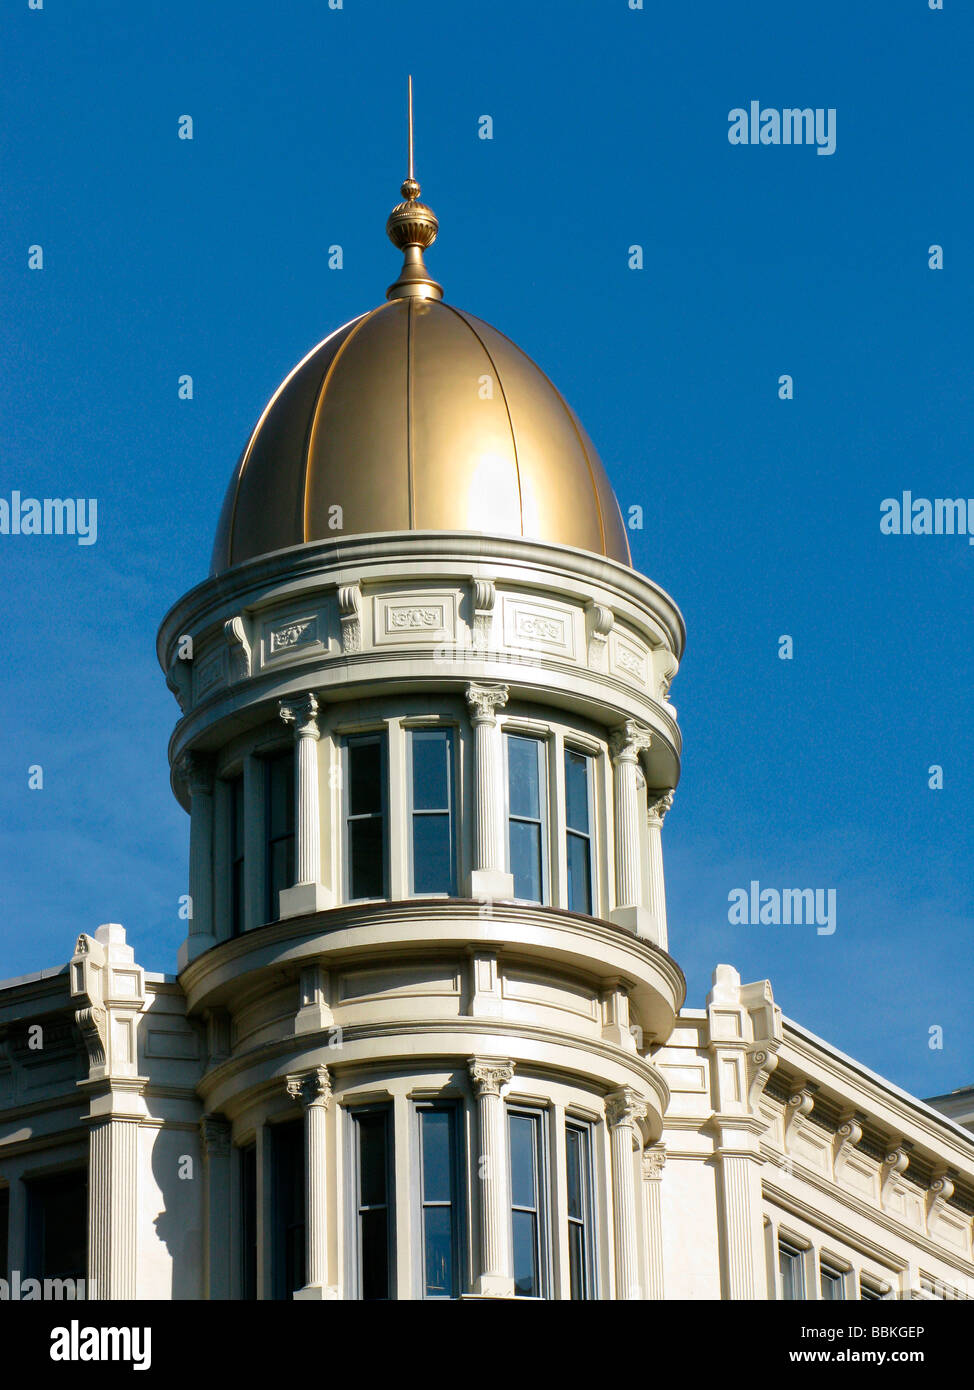 Gold Dome Stock Photo